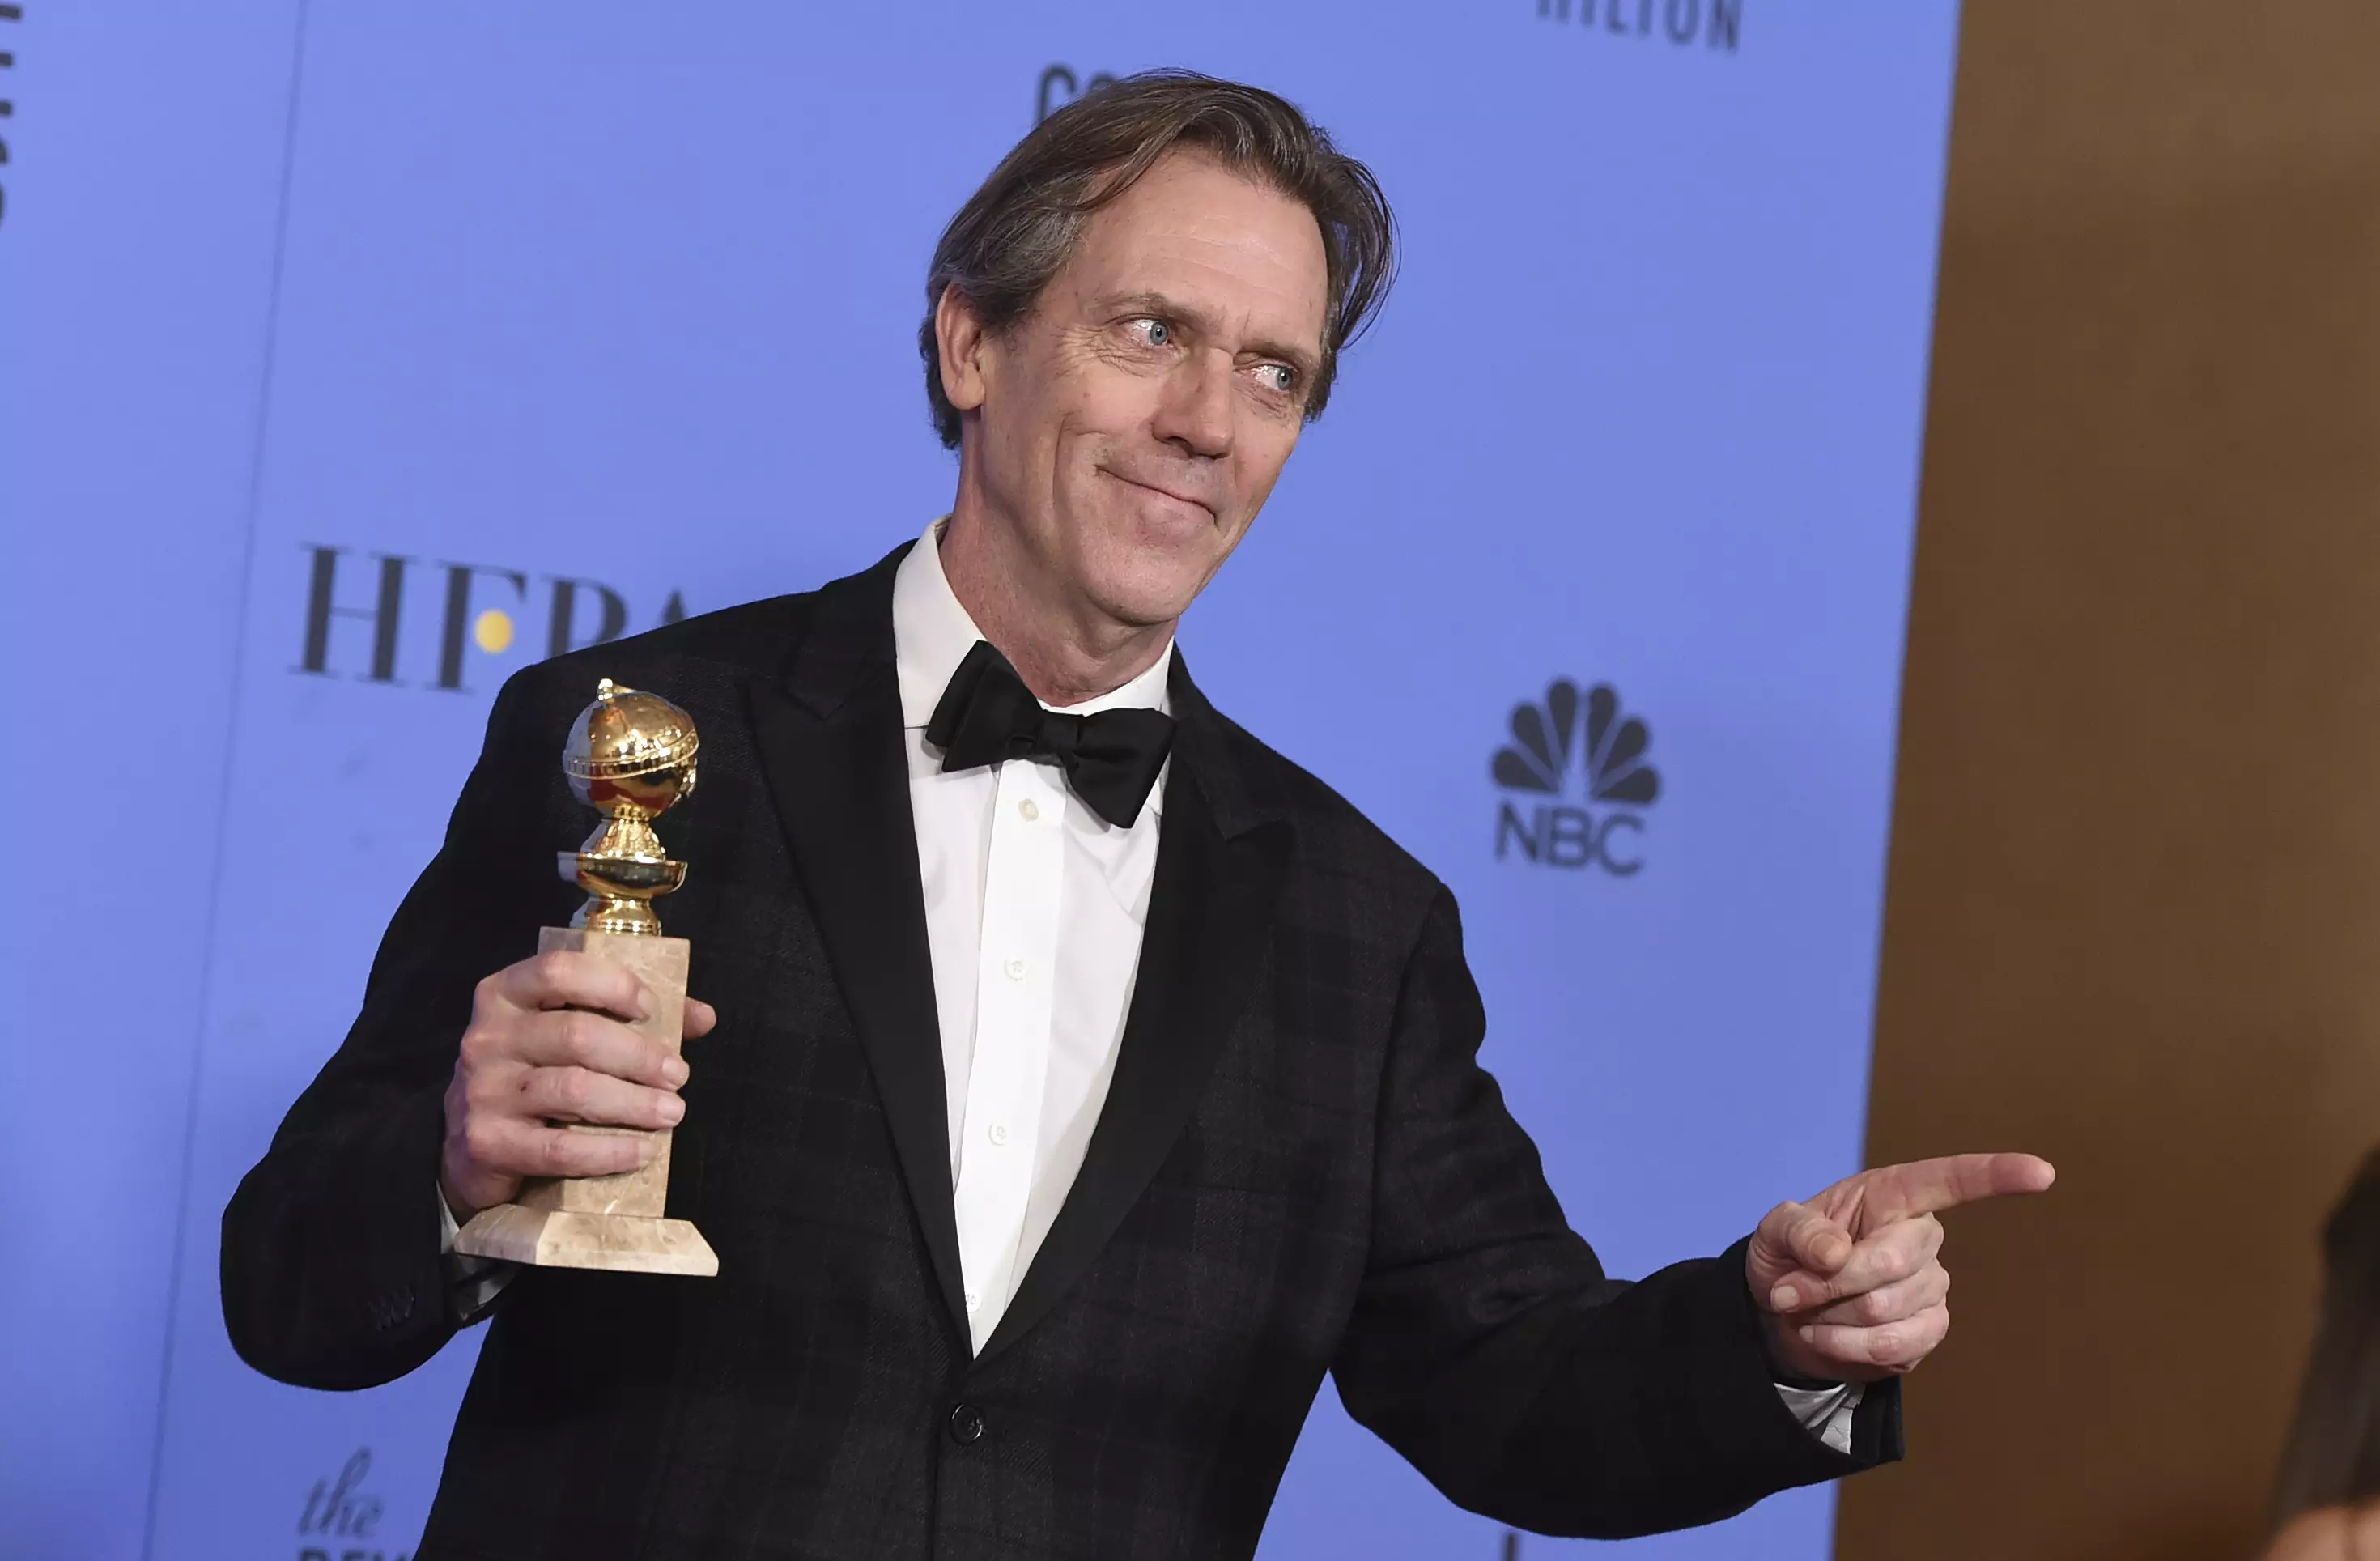 Hugh Laurie Couldn't Resist Taking A Pop At Trump